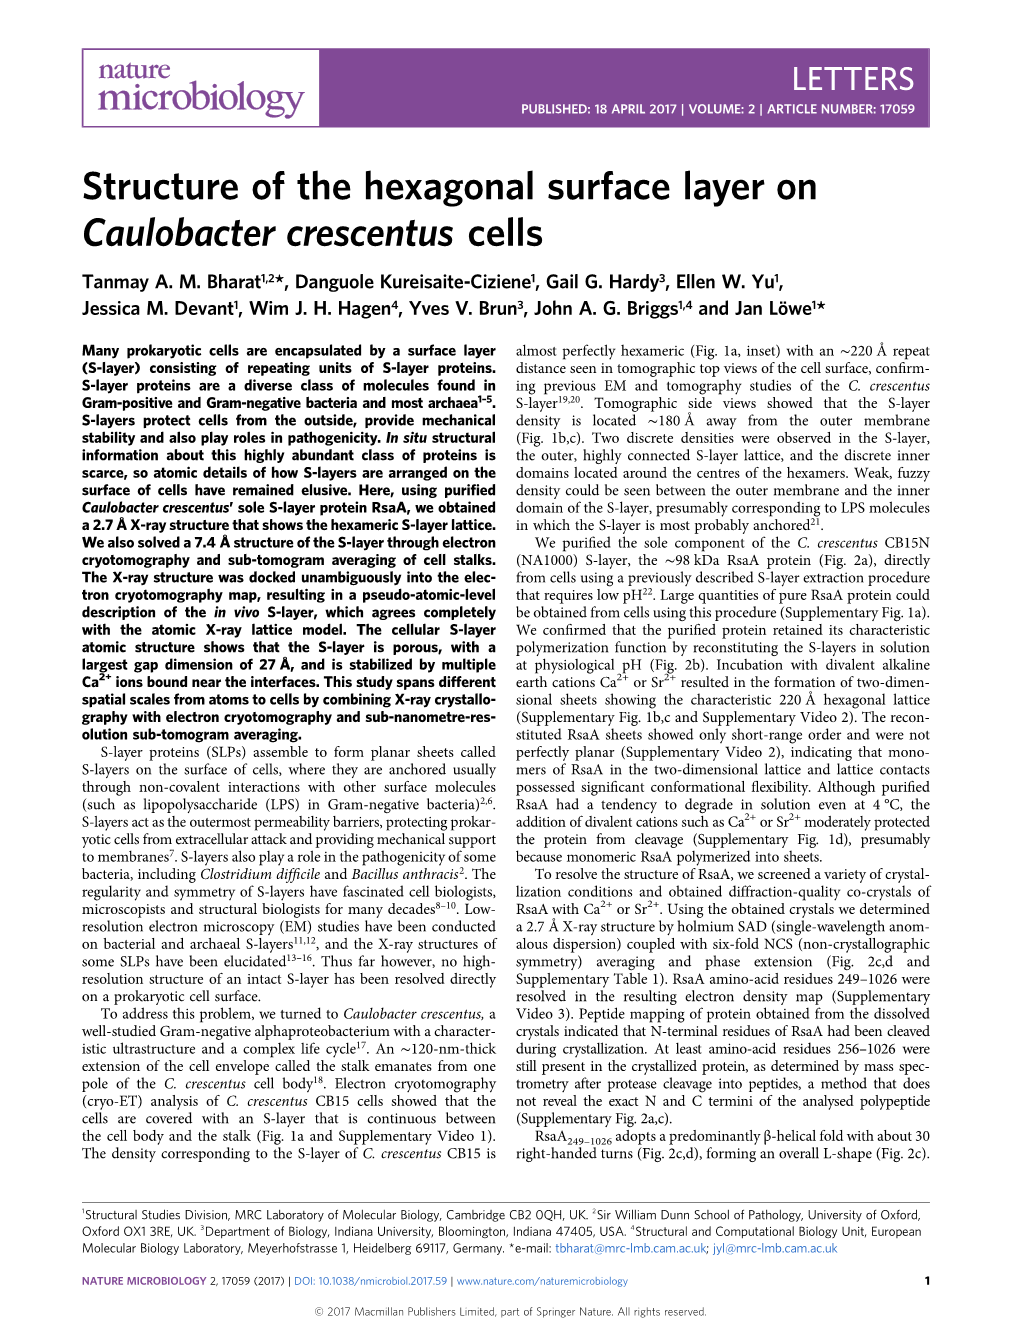 Structure of the Hexagonal Surface Layer on Caulobacter Crescentus Cells Tanmay A